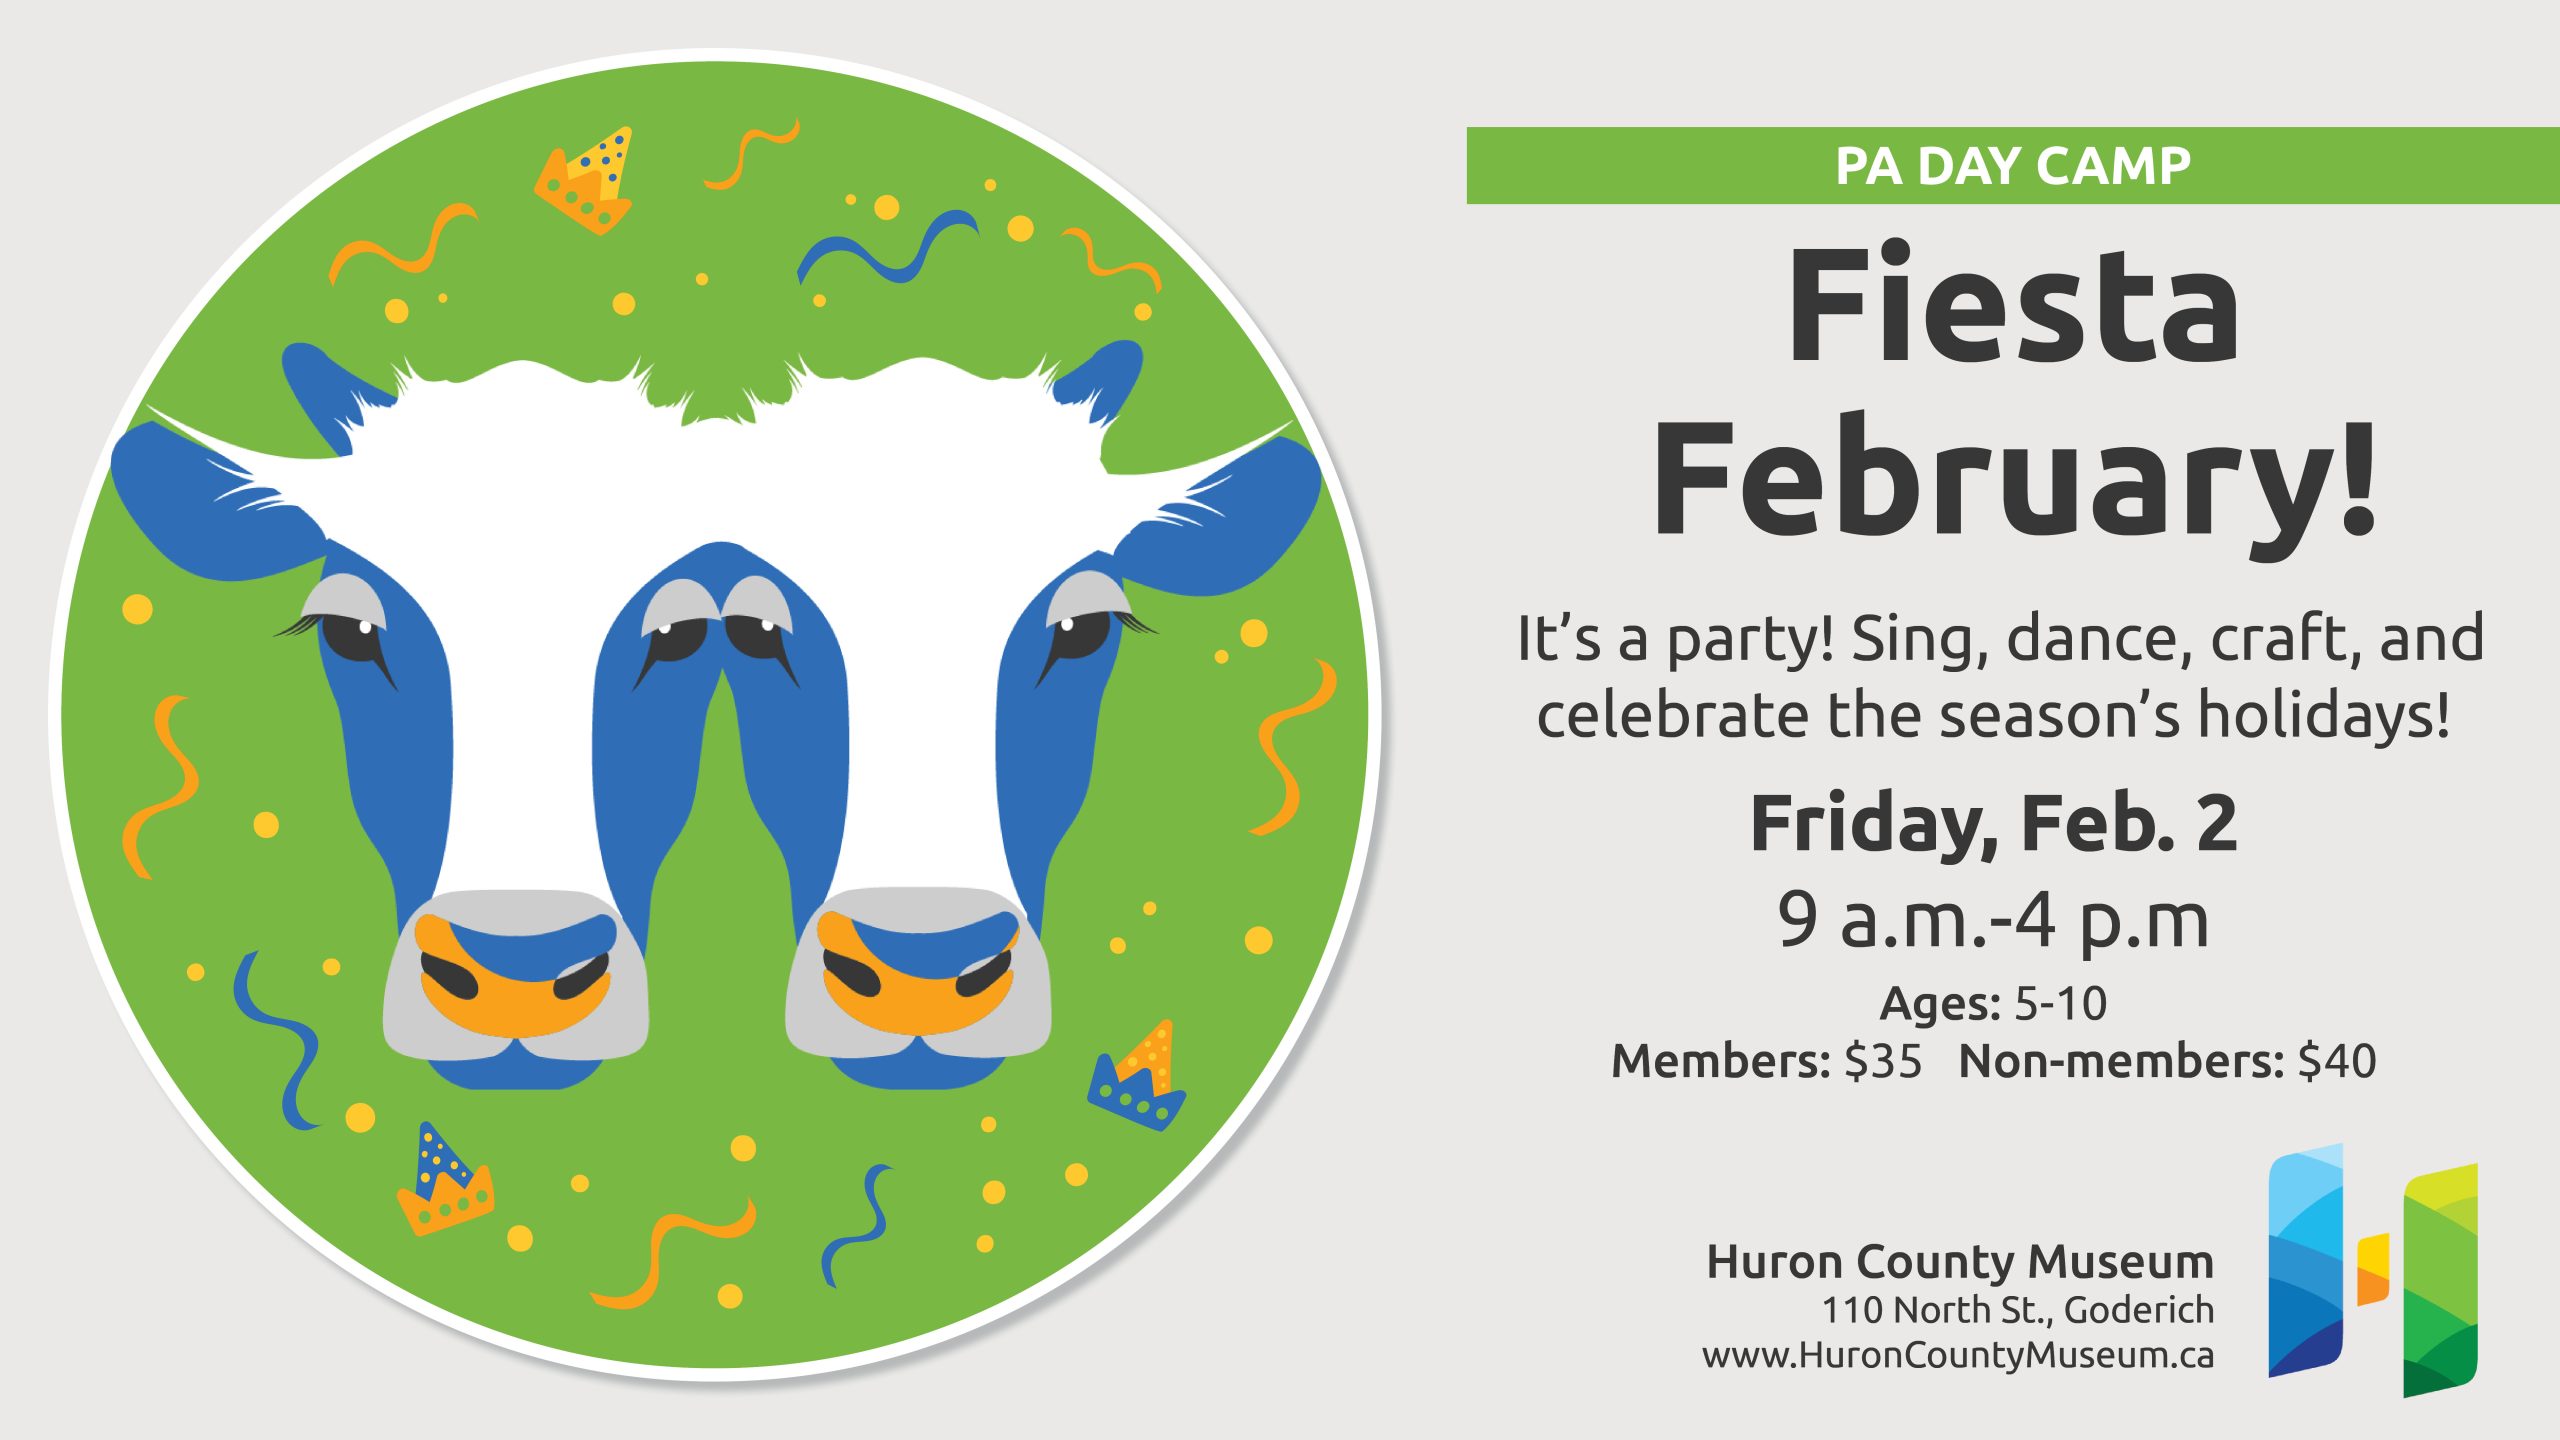 Illustration of the Museum two-headed calf with streamers and party hats around them. Text promotes PA Day Camp at the Museum Feb. 2.